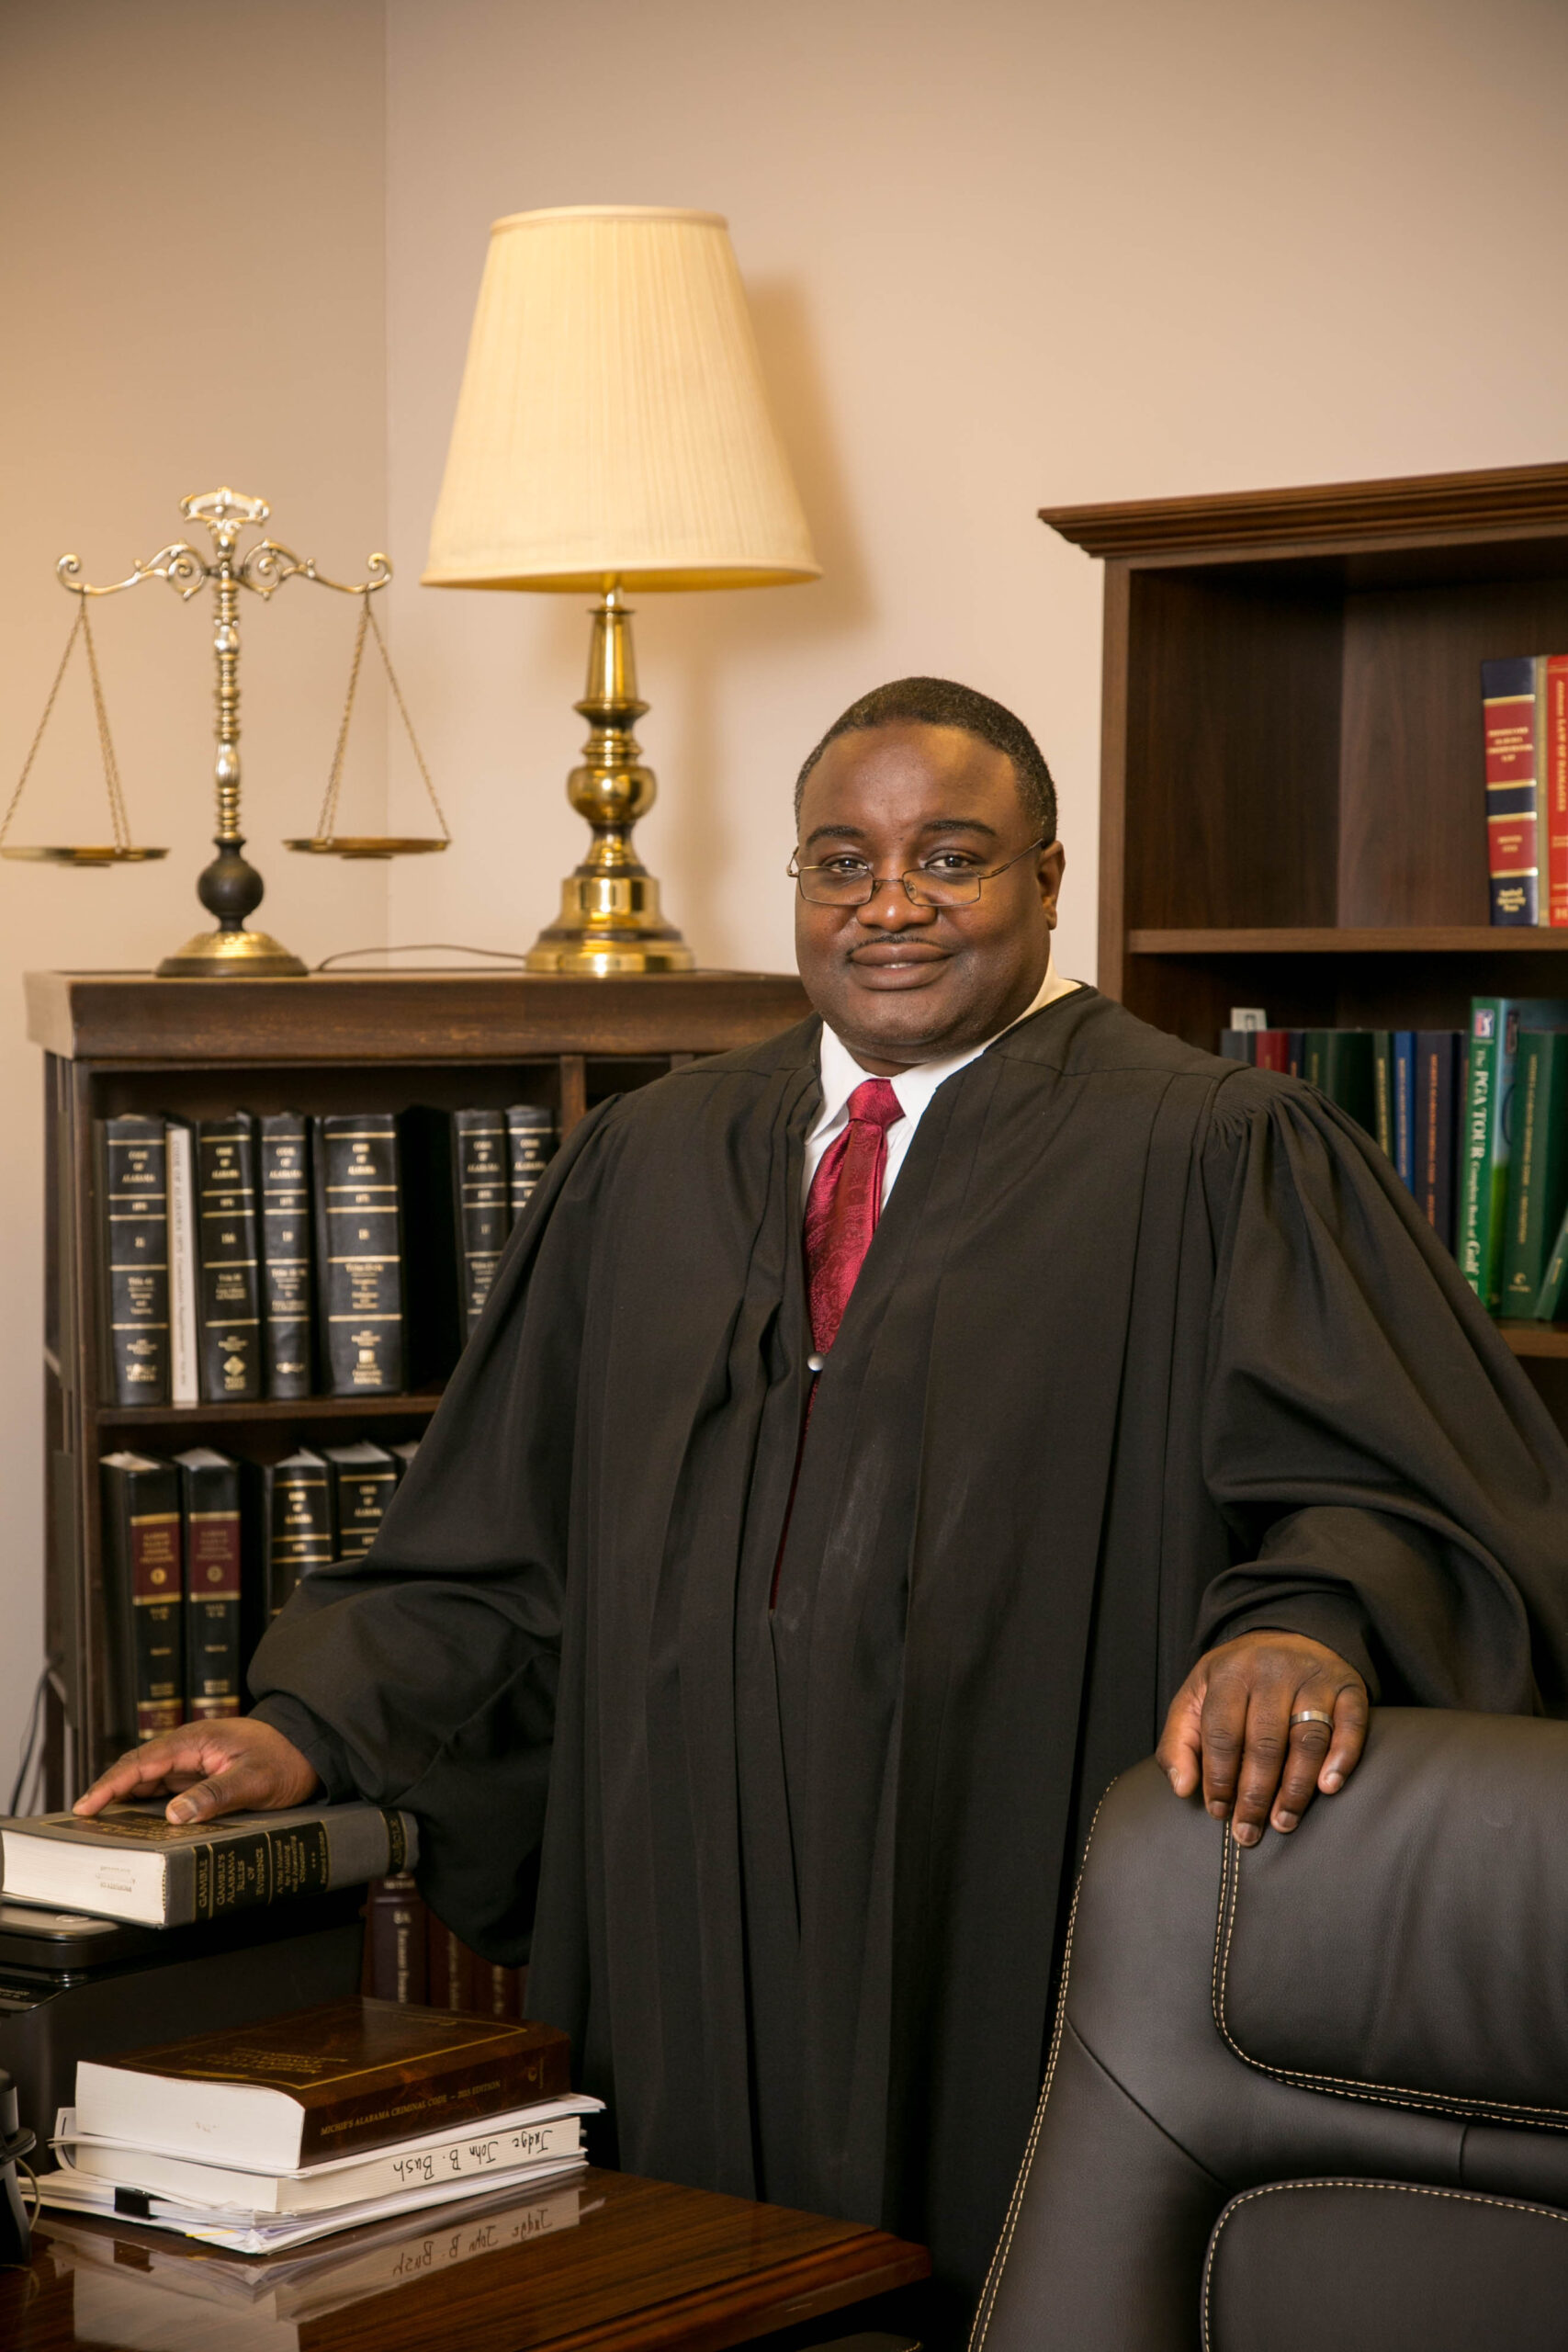 Governor Ivey Appoints Judge Bill Lewis to Alabama Court of Civil Appeals